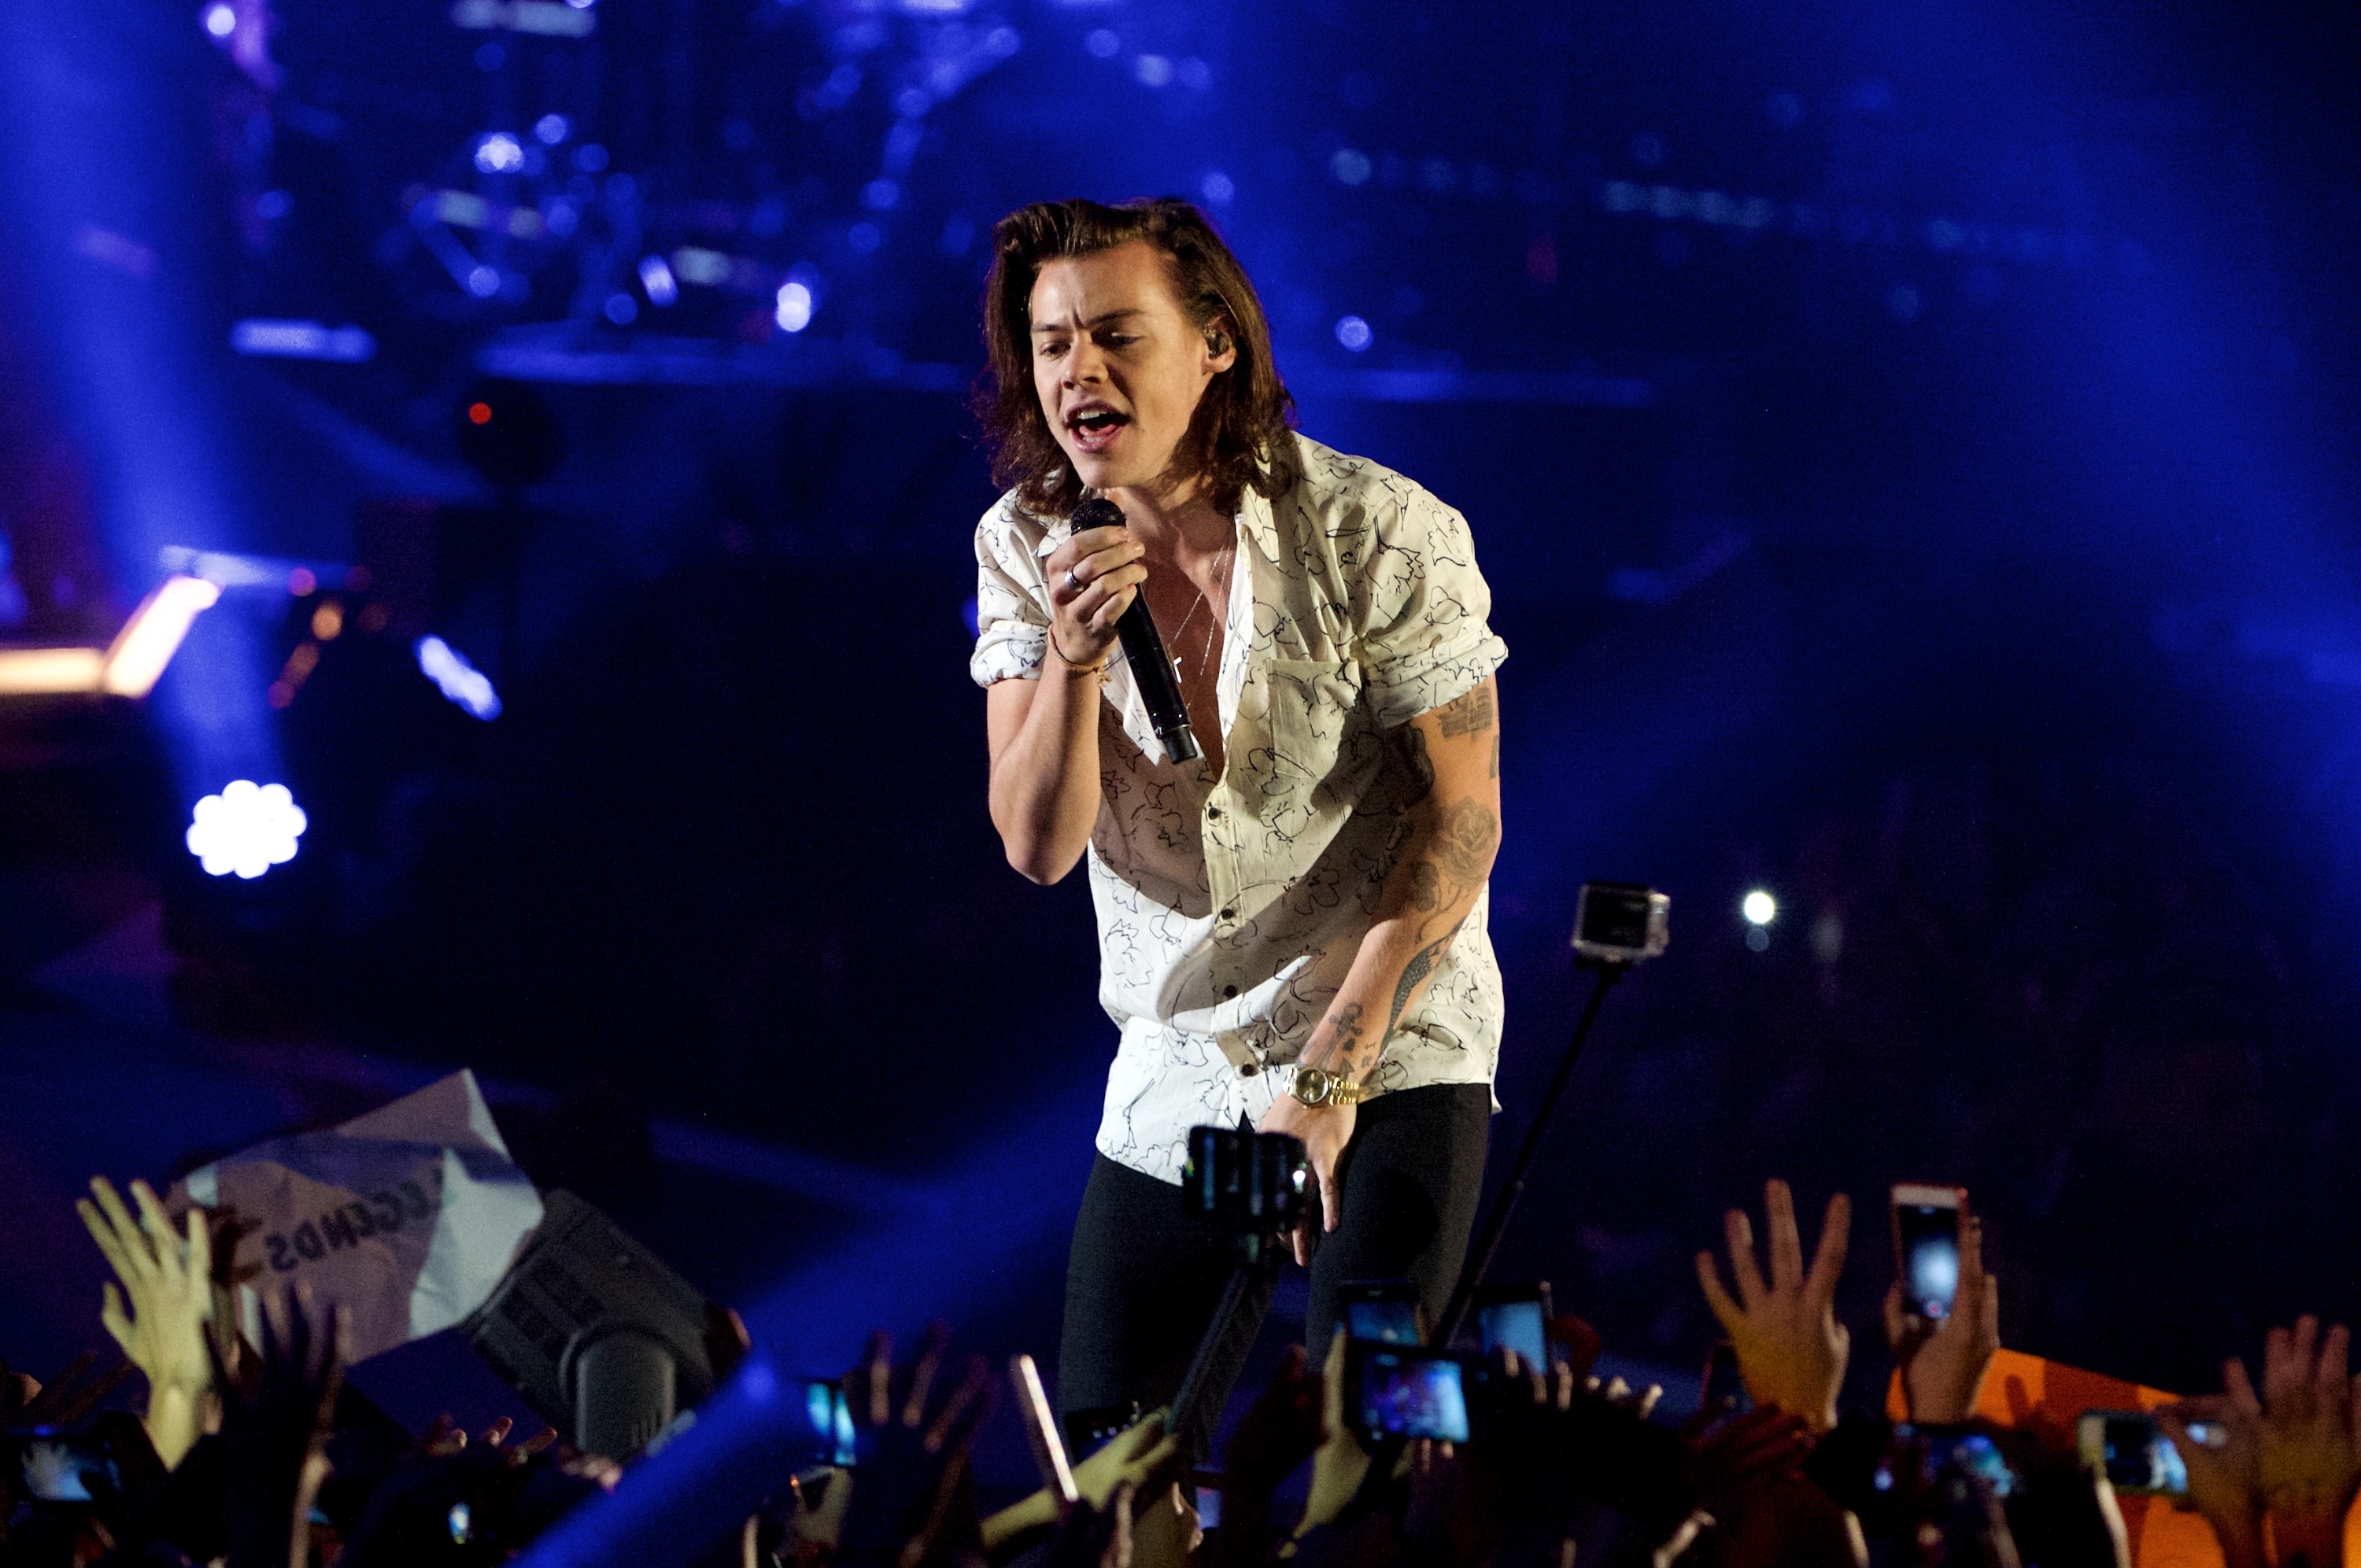 Harry Styles performs onstage in a patterned shirt, surrounded by an audience